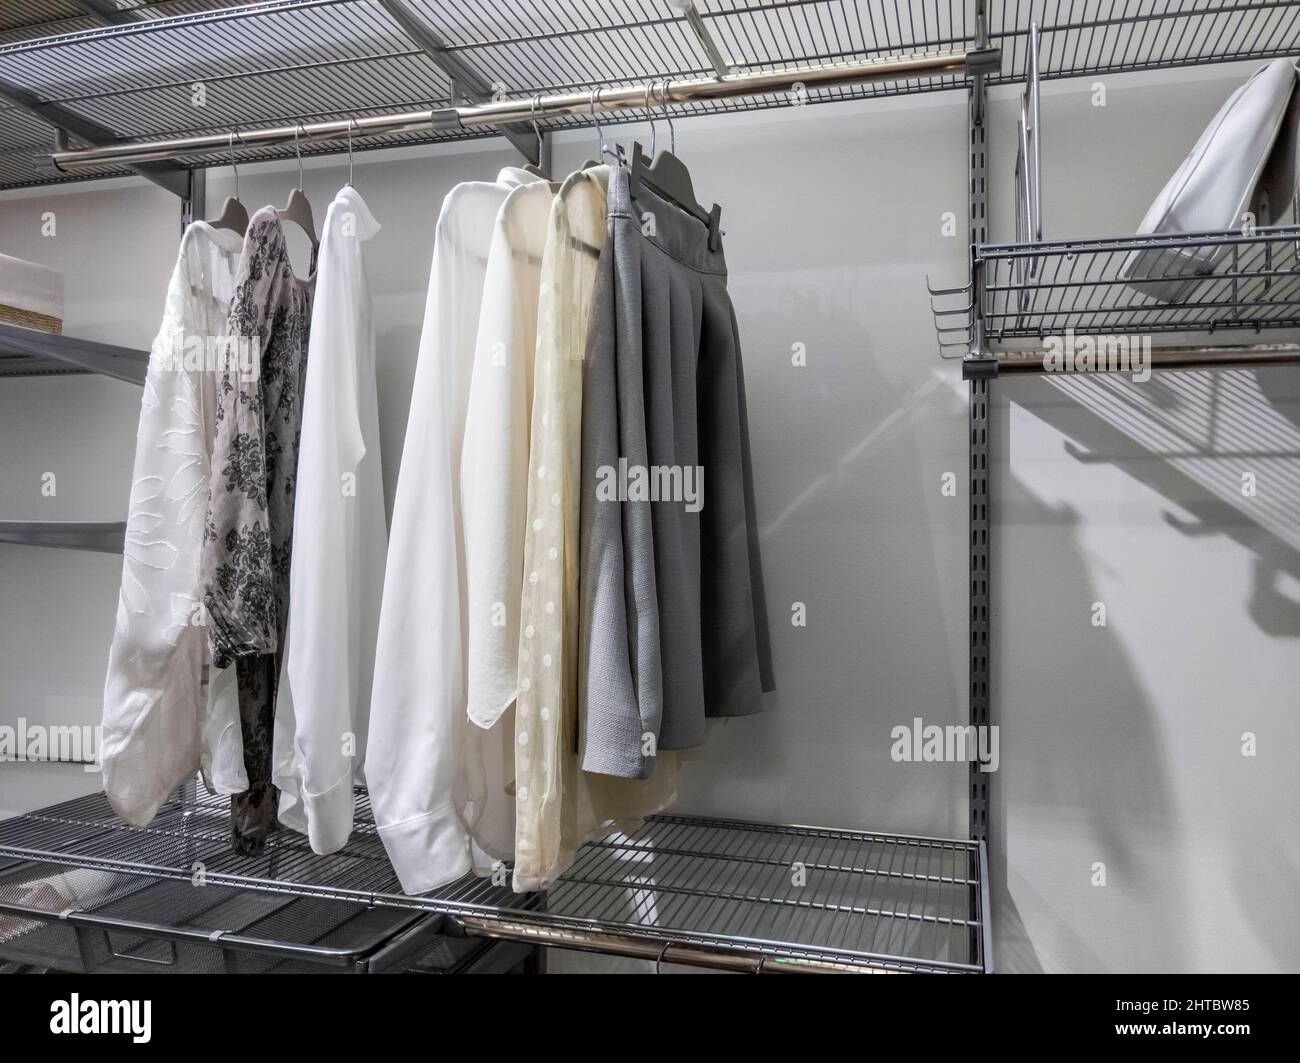 Collection of monotone colors tops and bottoms hanging inside an organized walk in closet with metal wire rack shelving Stock Photo